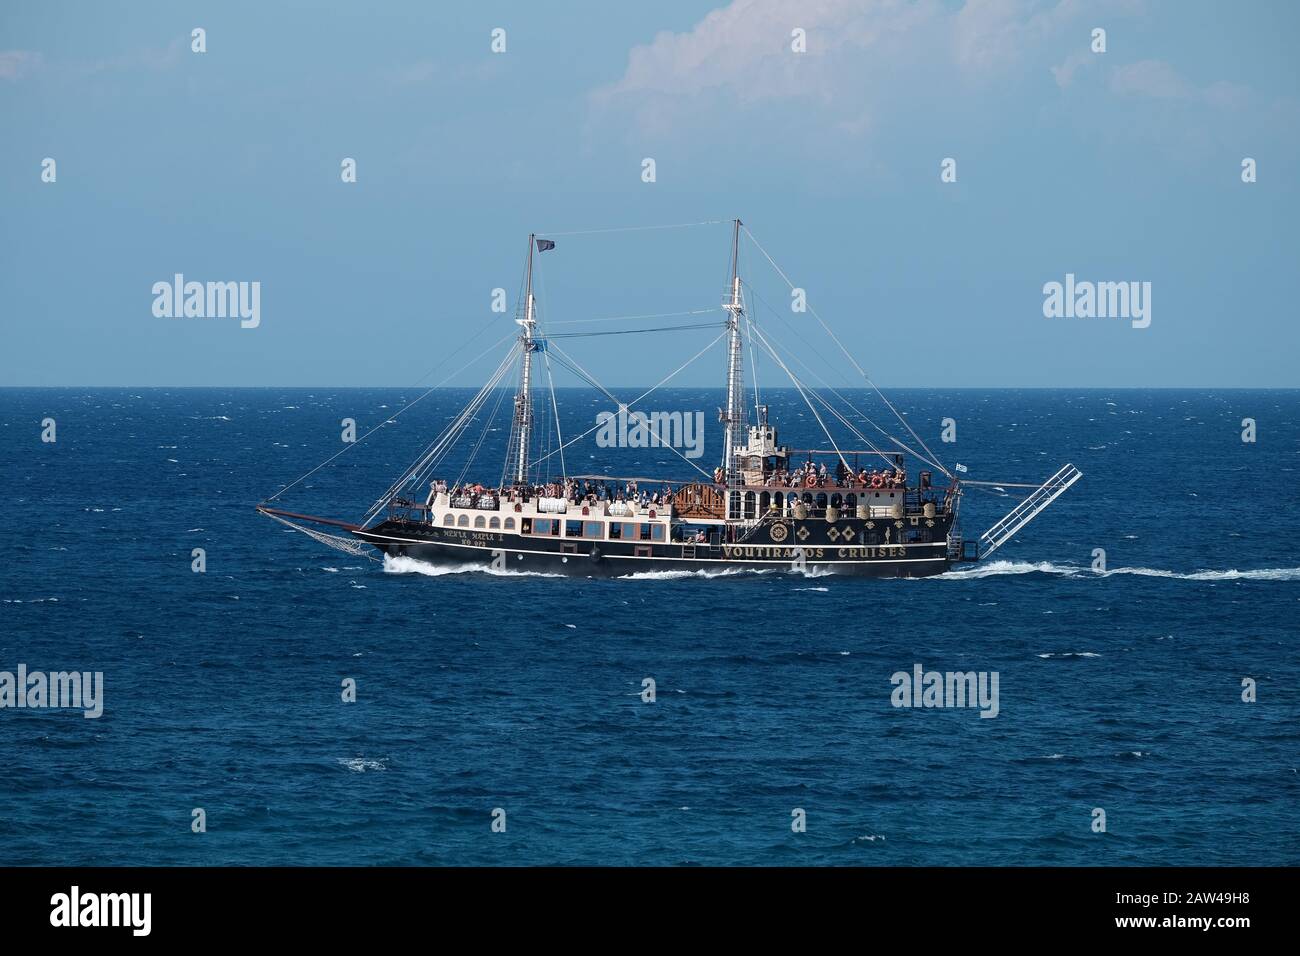 Voutirakos Cruises galleon themed pirate ship in the sea of Zakinthos Greece taking tourists on tours of the island. Stock Photo